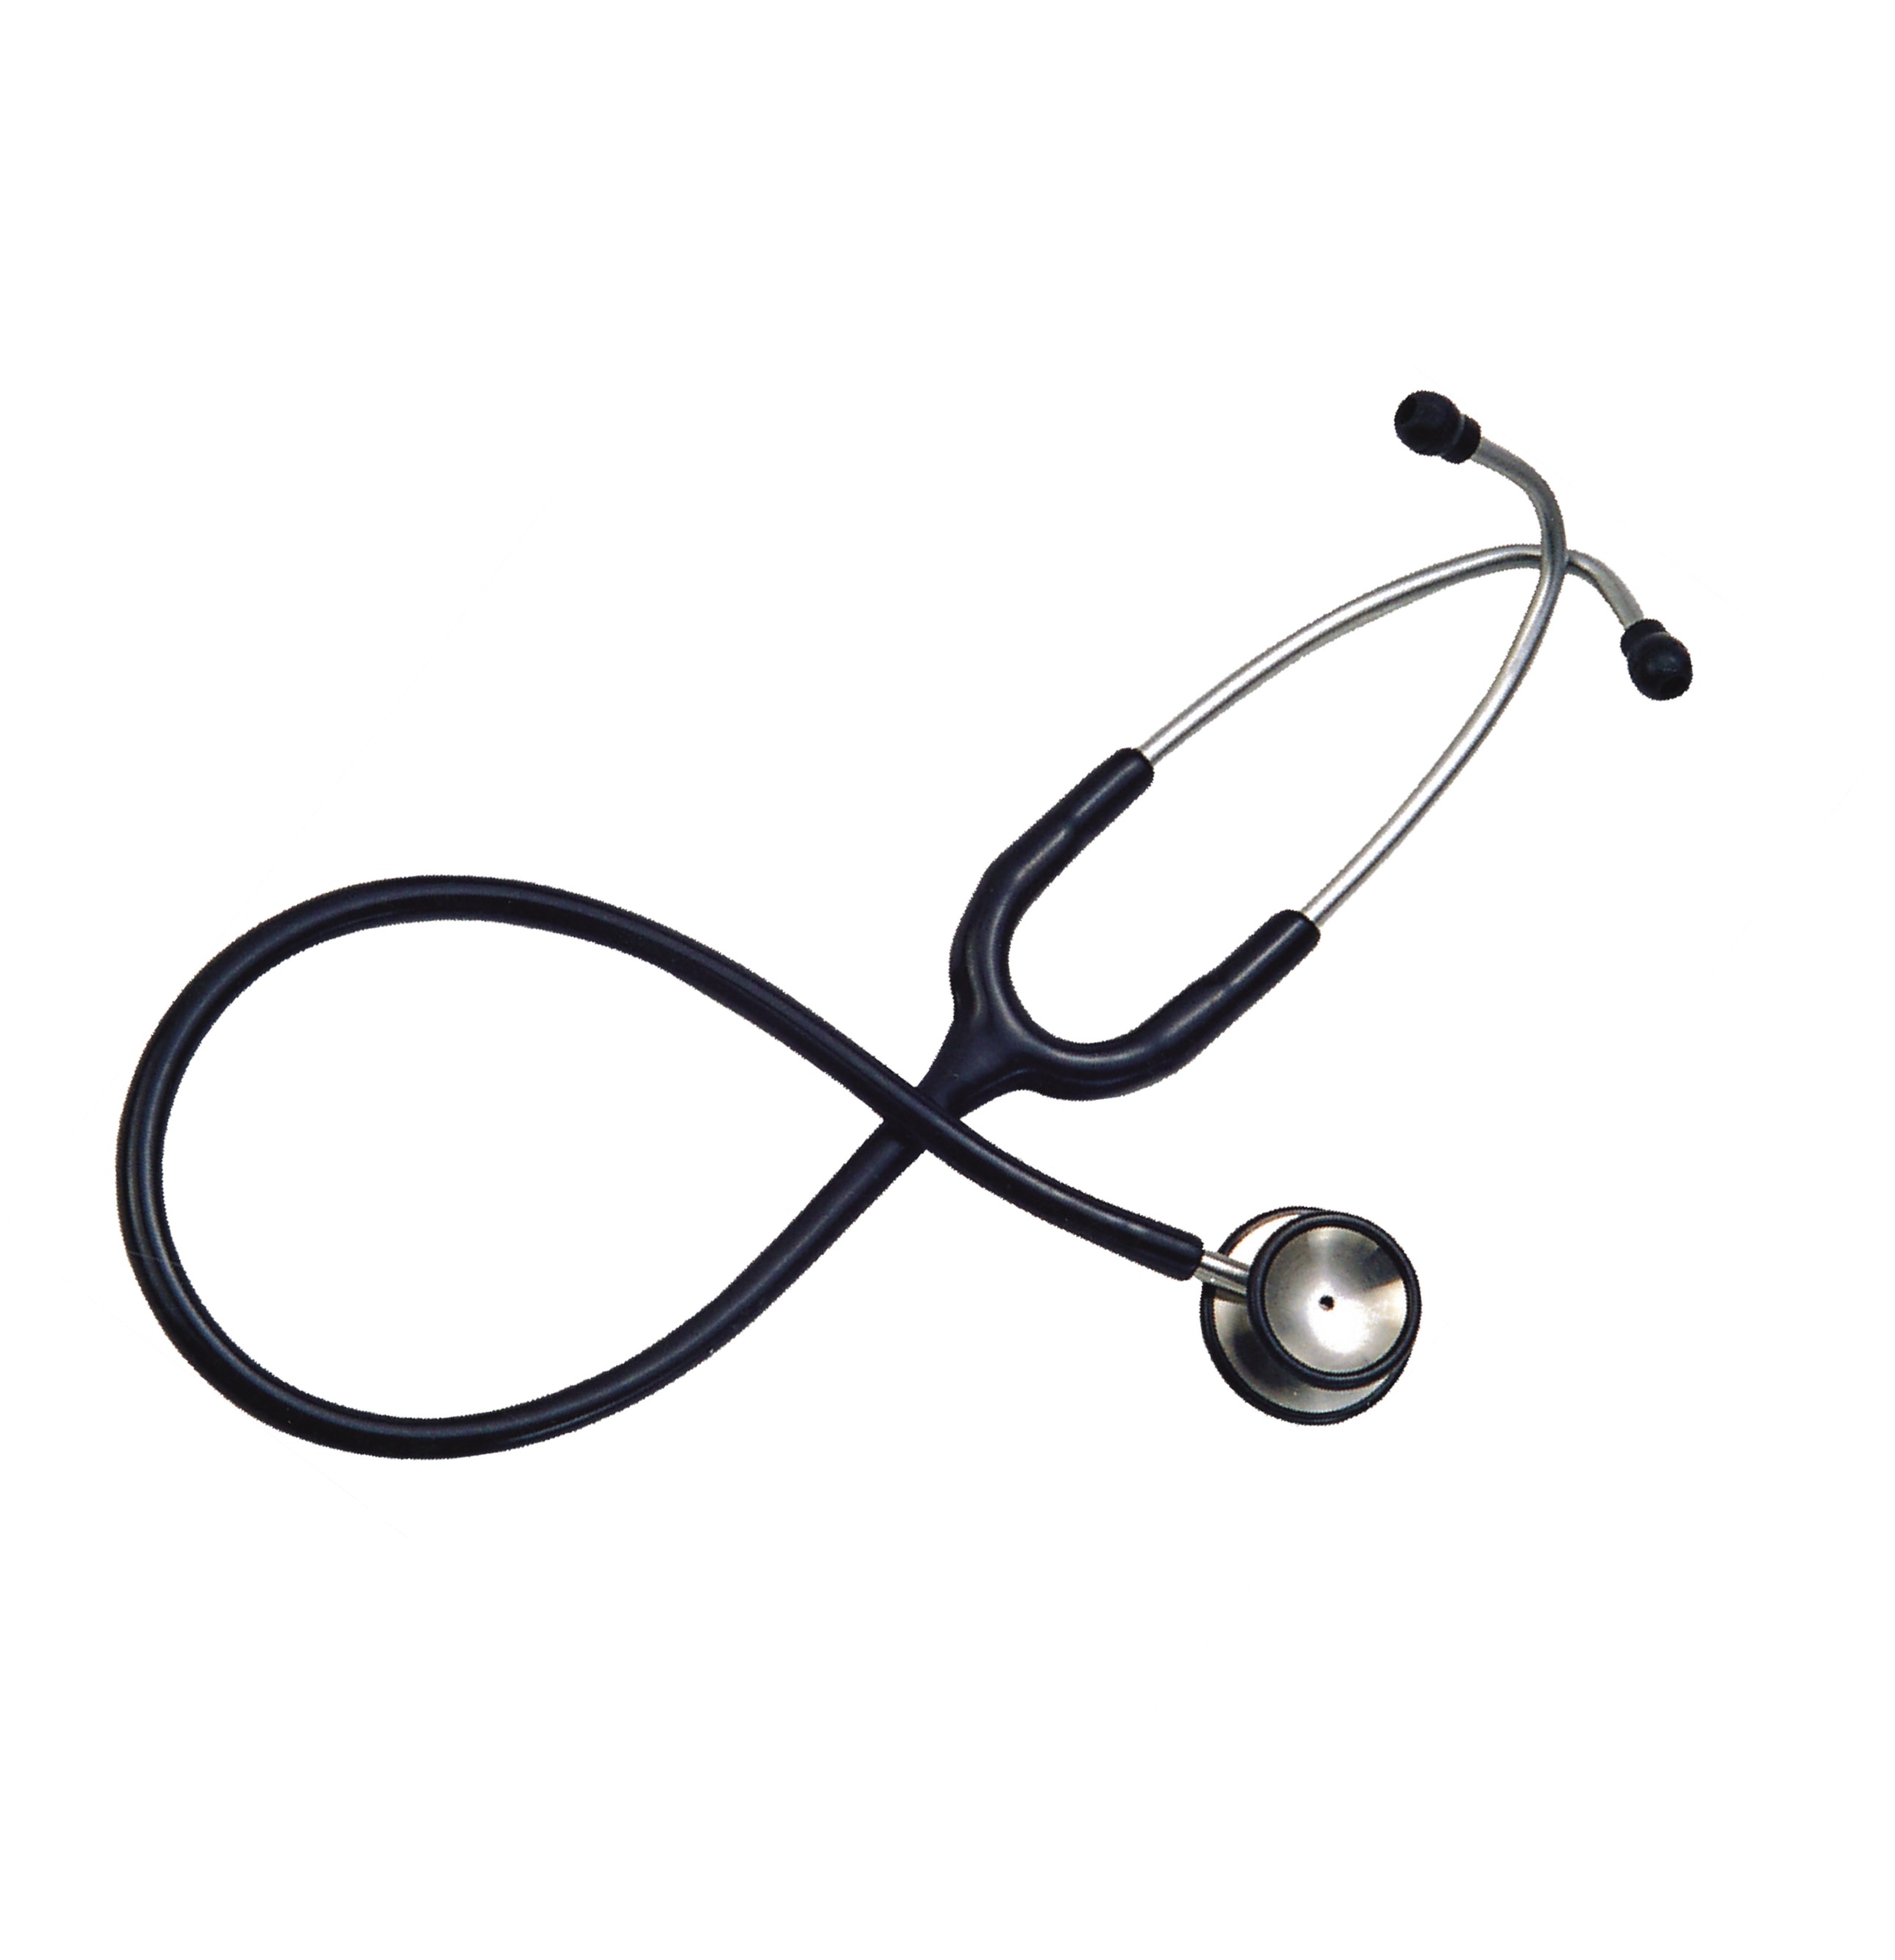 Stethoscope clipart 11